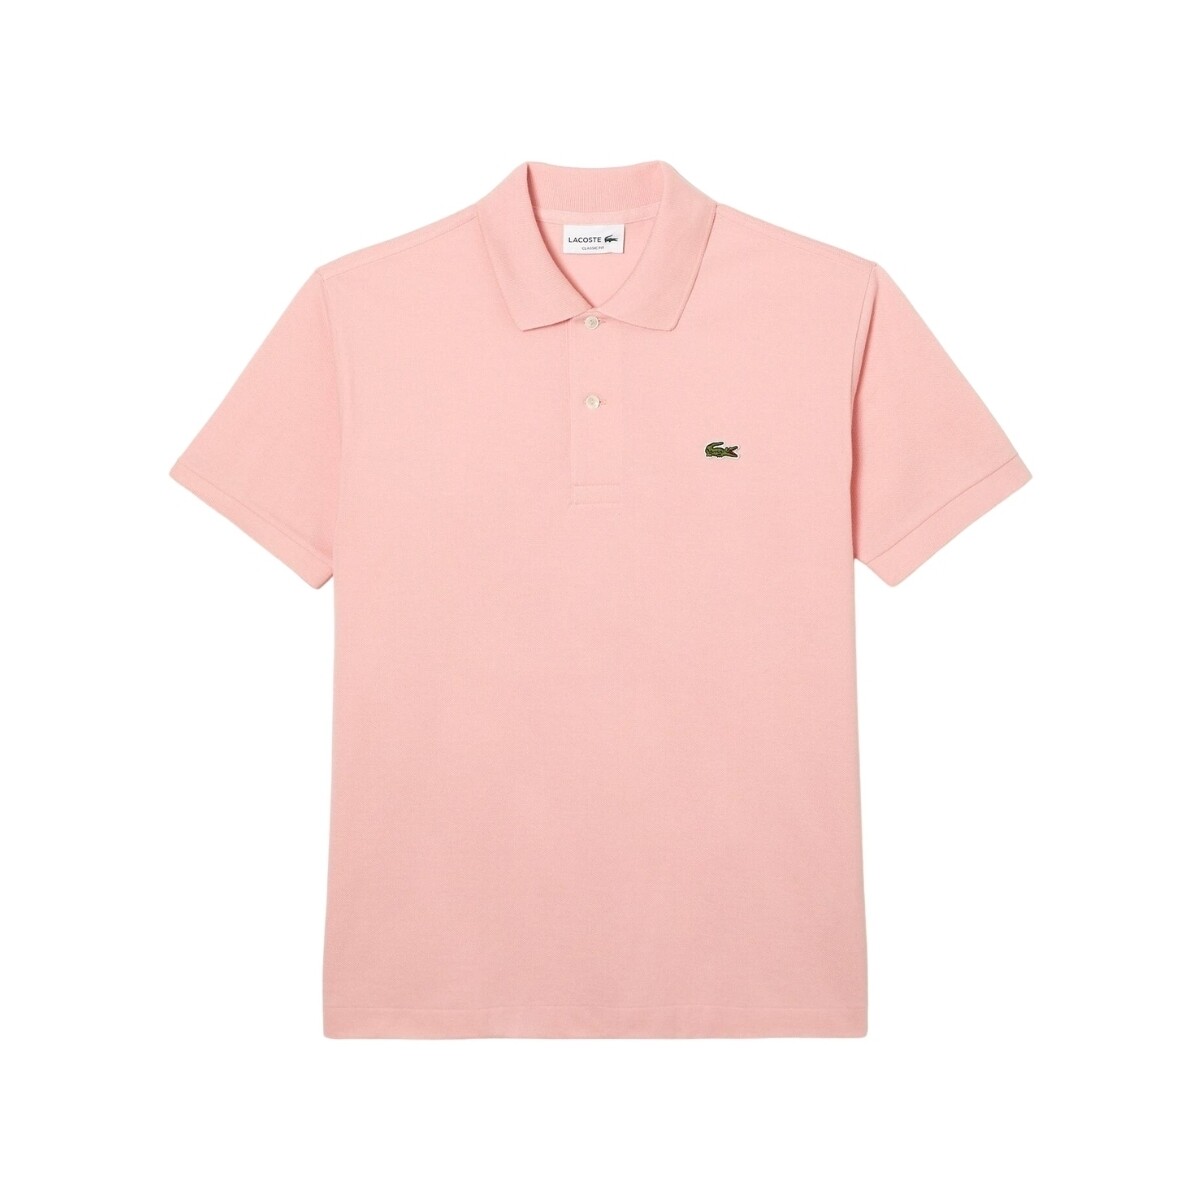 Vêtements Homme T-shirts & Polos Lacoste Polo homme  ref 52087 KF9 Rose Rose